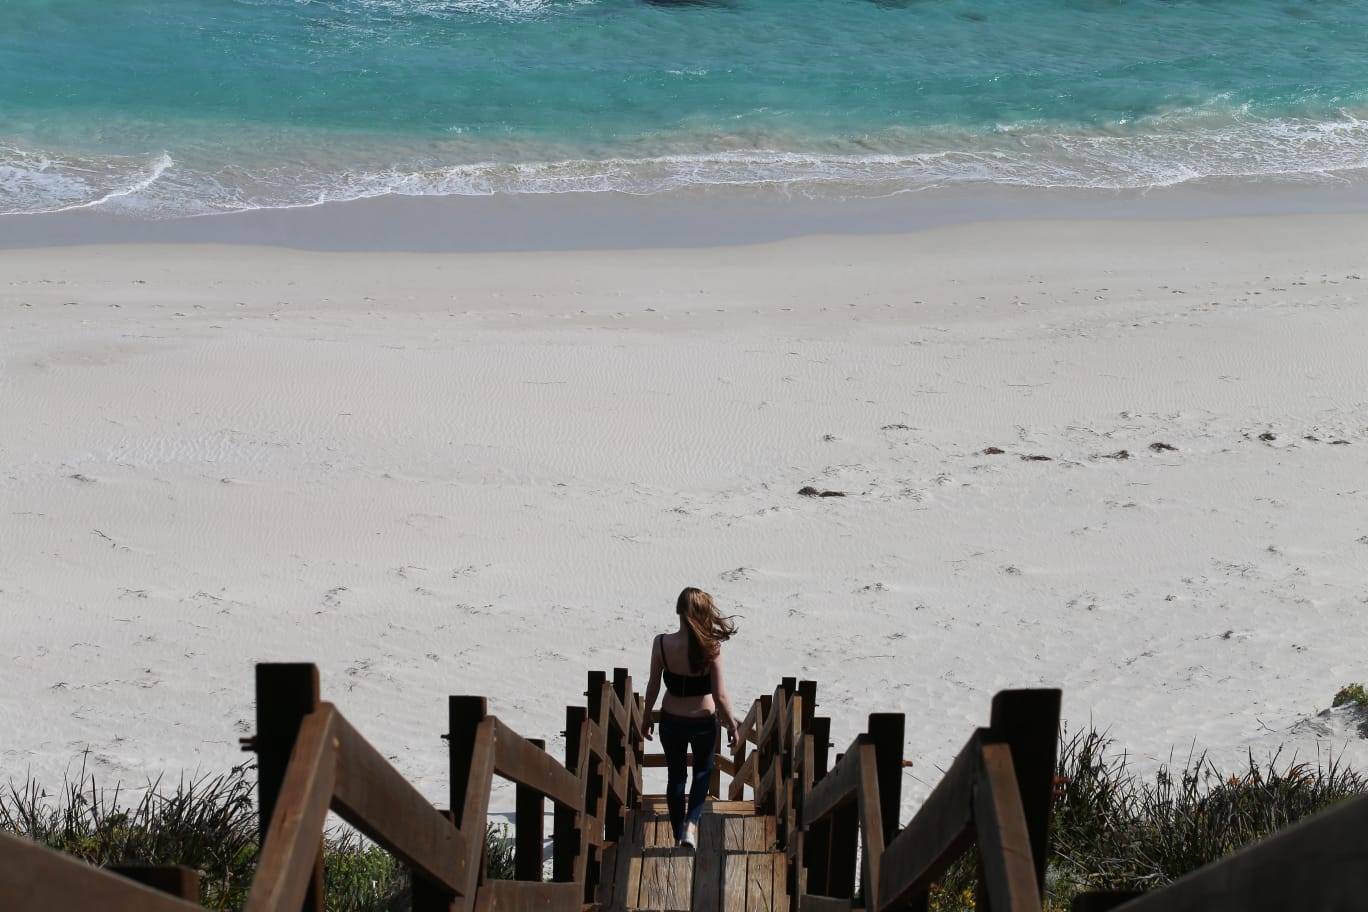 Me running down a nice steep wooden staircase to the beach - especially for the photo lol